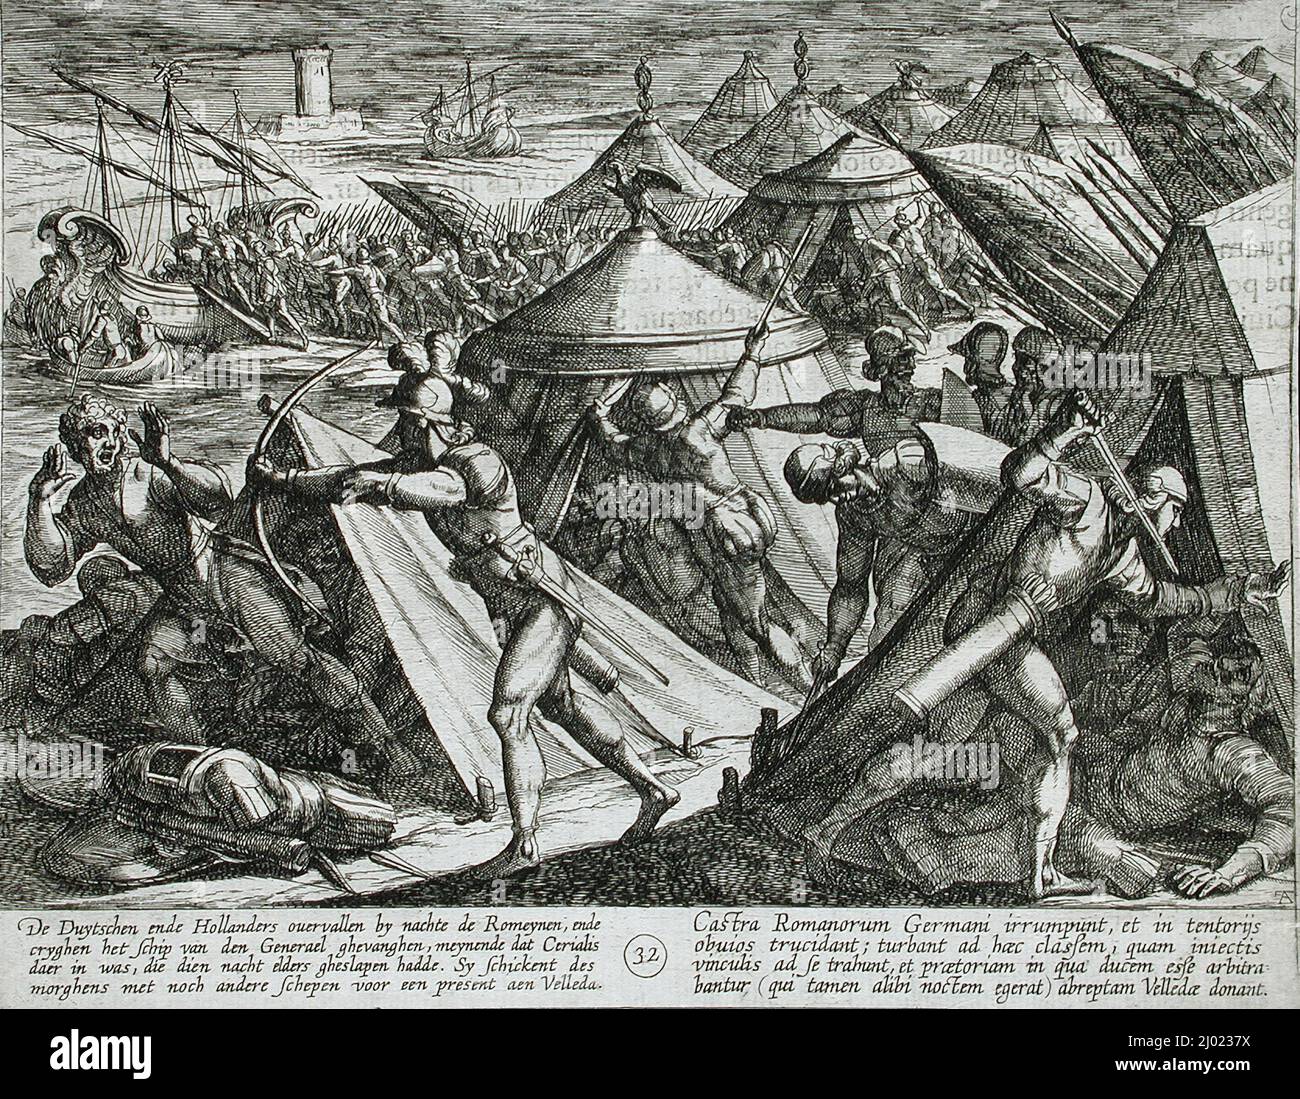 Dutch and Germans Attack the Roman Camp and Capture Cerialis' Boat. Antonio Tempesta (Italy, Florence, 1555-1630). Italy, publshed 1612. Prints; etchings. Etching Stock Photo